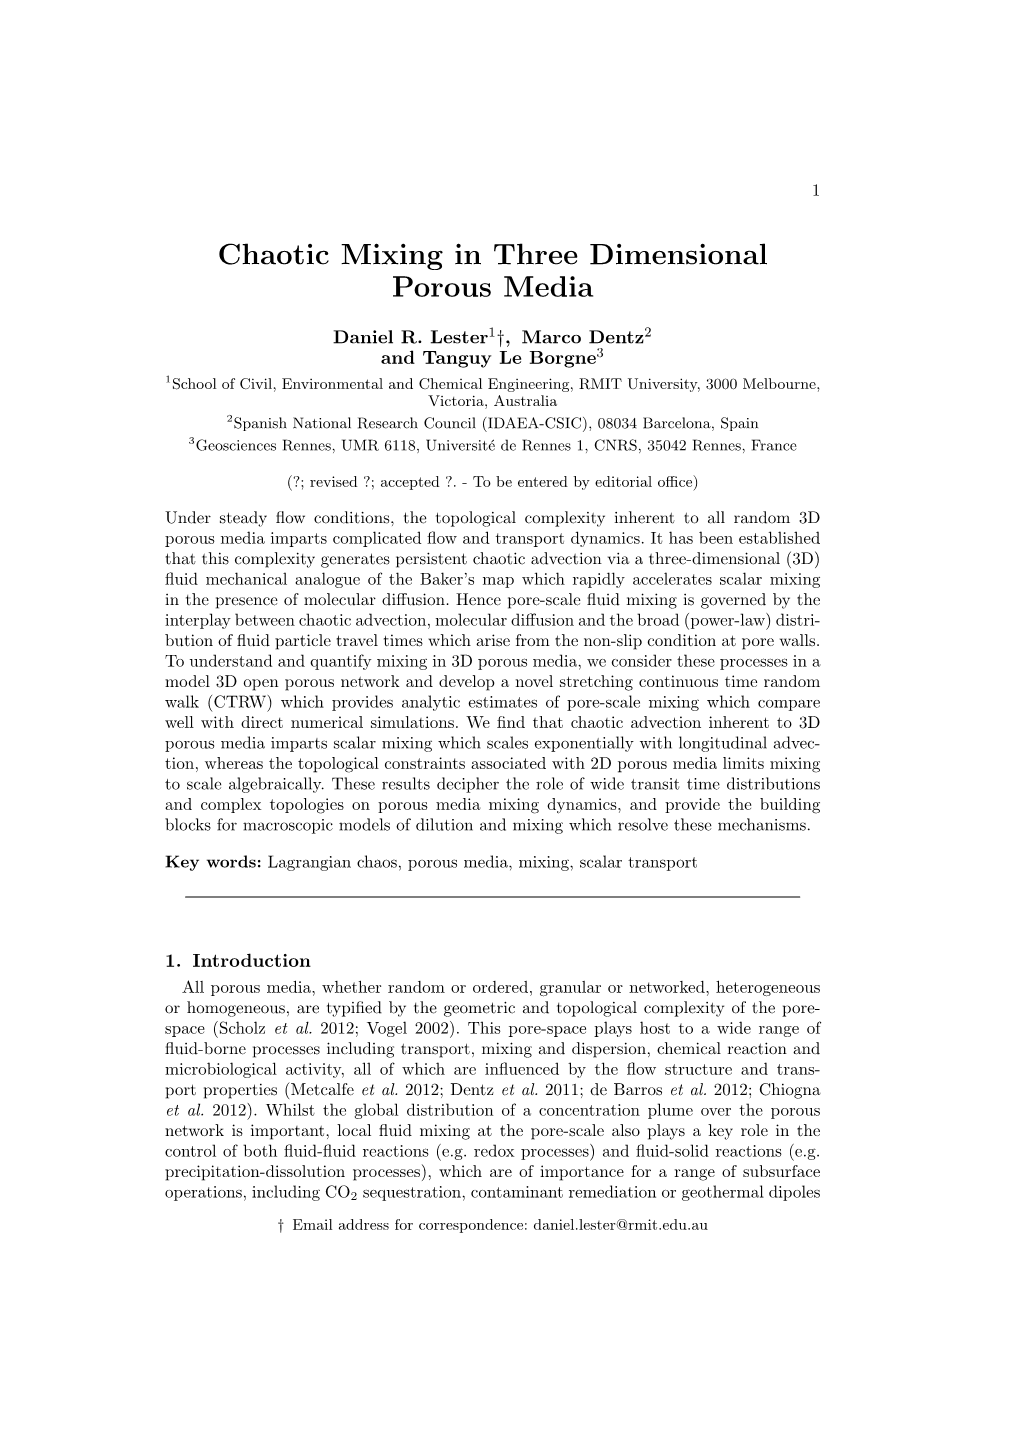 Chaotic Mixing in Three Dimensional Porous Media